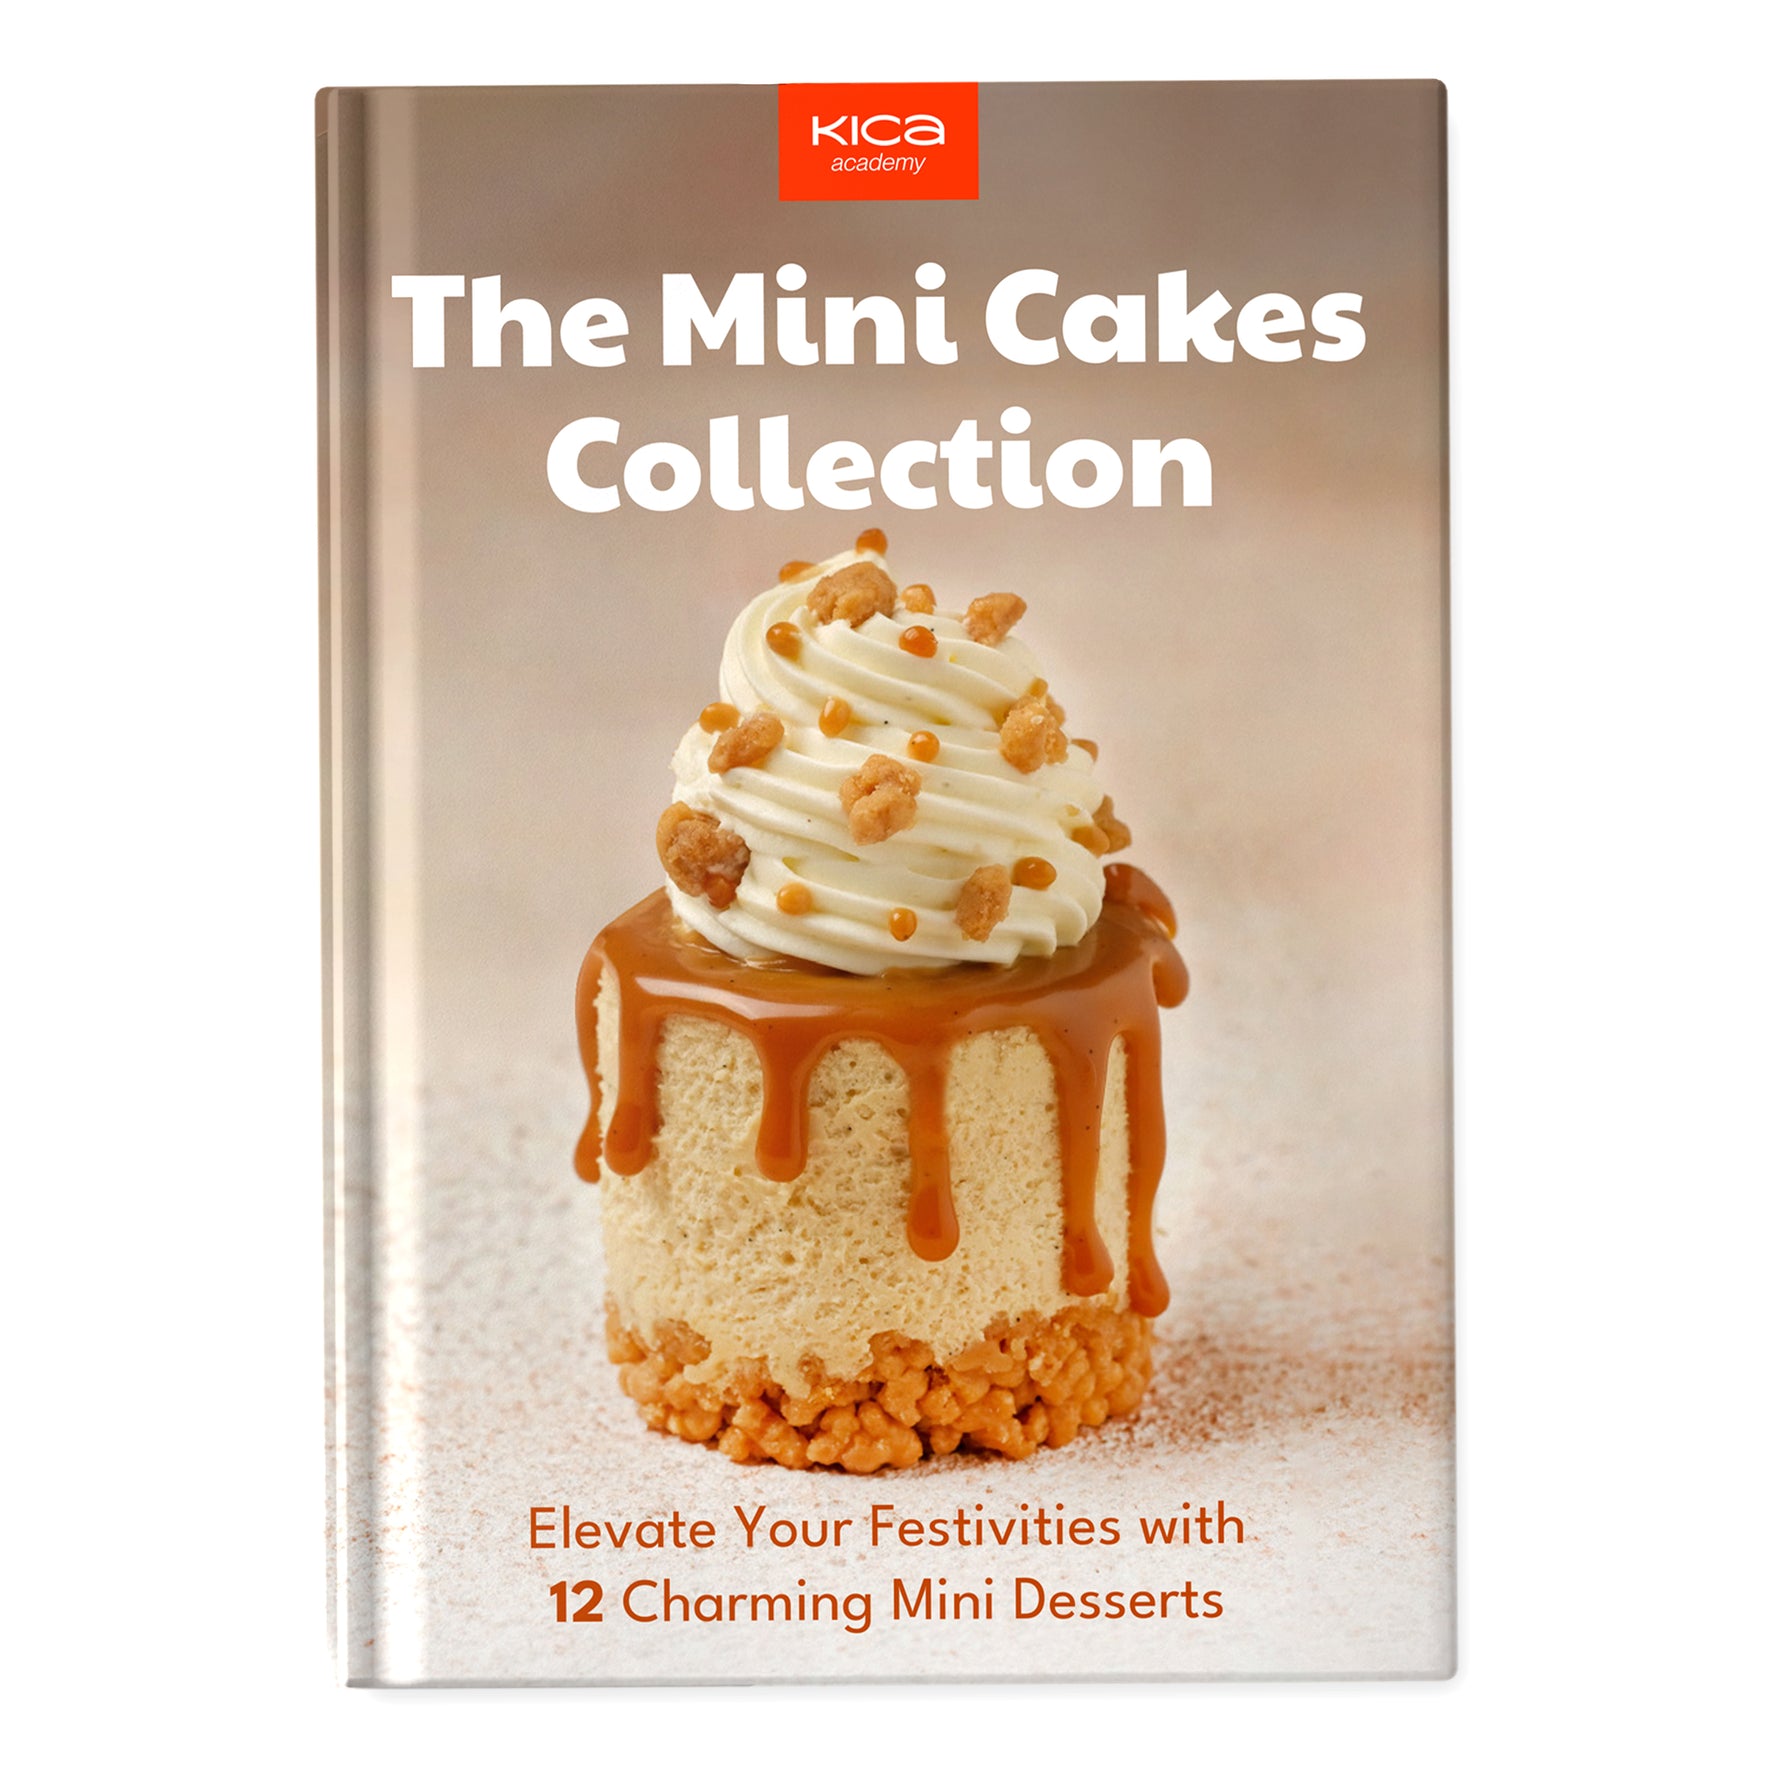 The Mini Cakes Collection